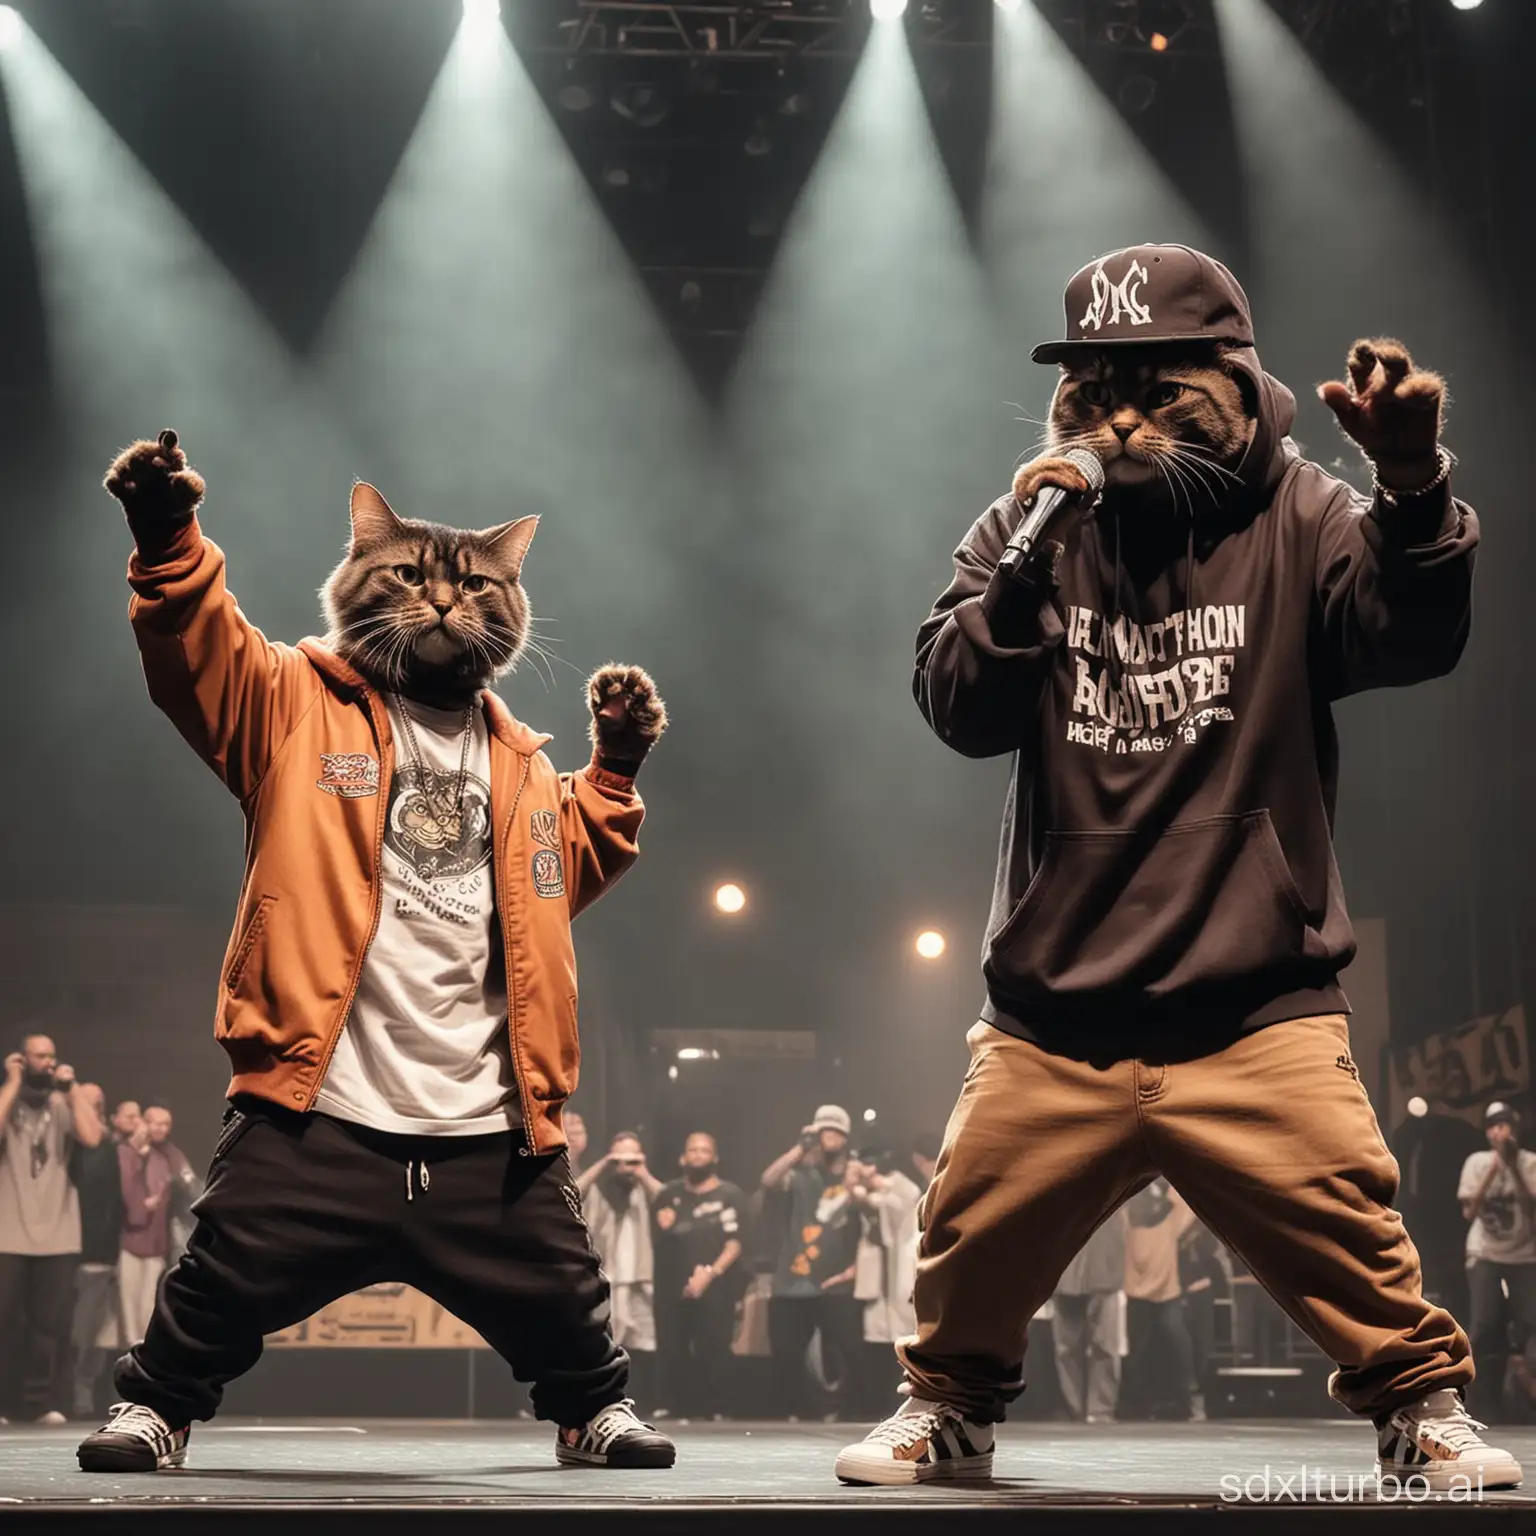 The anthropomorphized black cat rapper MC Gon and the anthropomorphized brown tabby cat rapper MC Chobi are having a rap battle on stage.